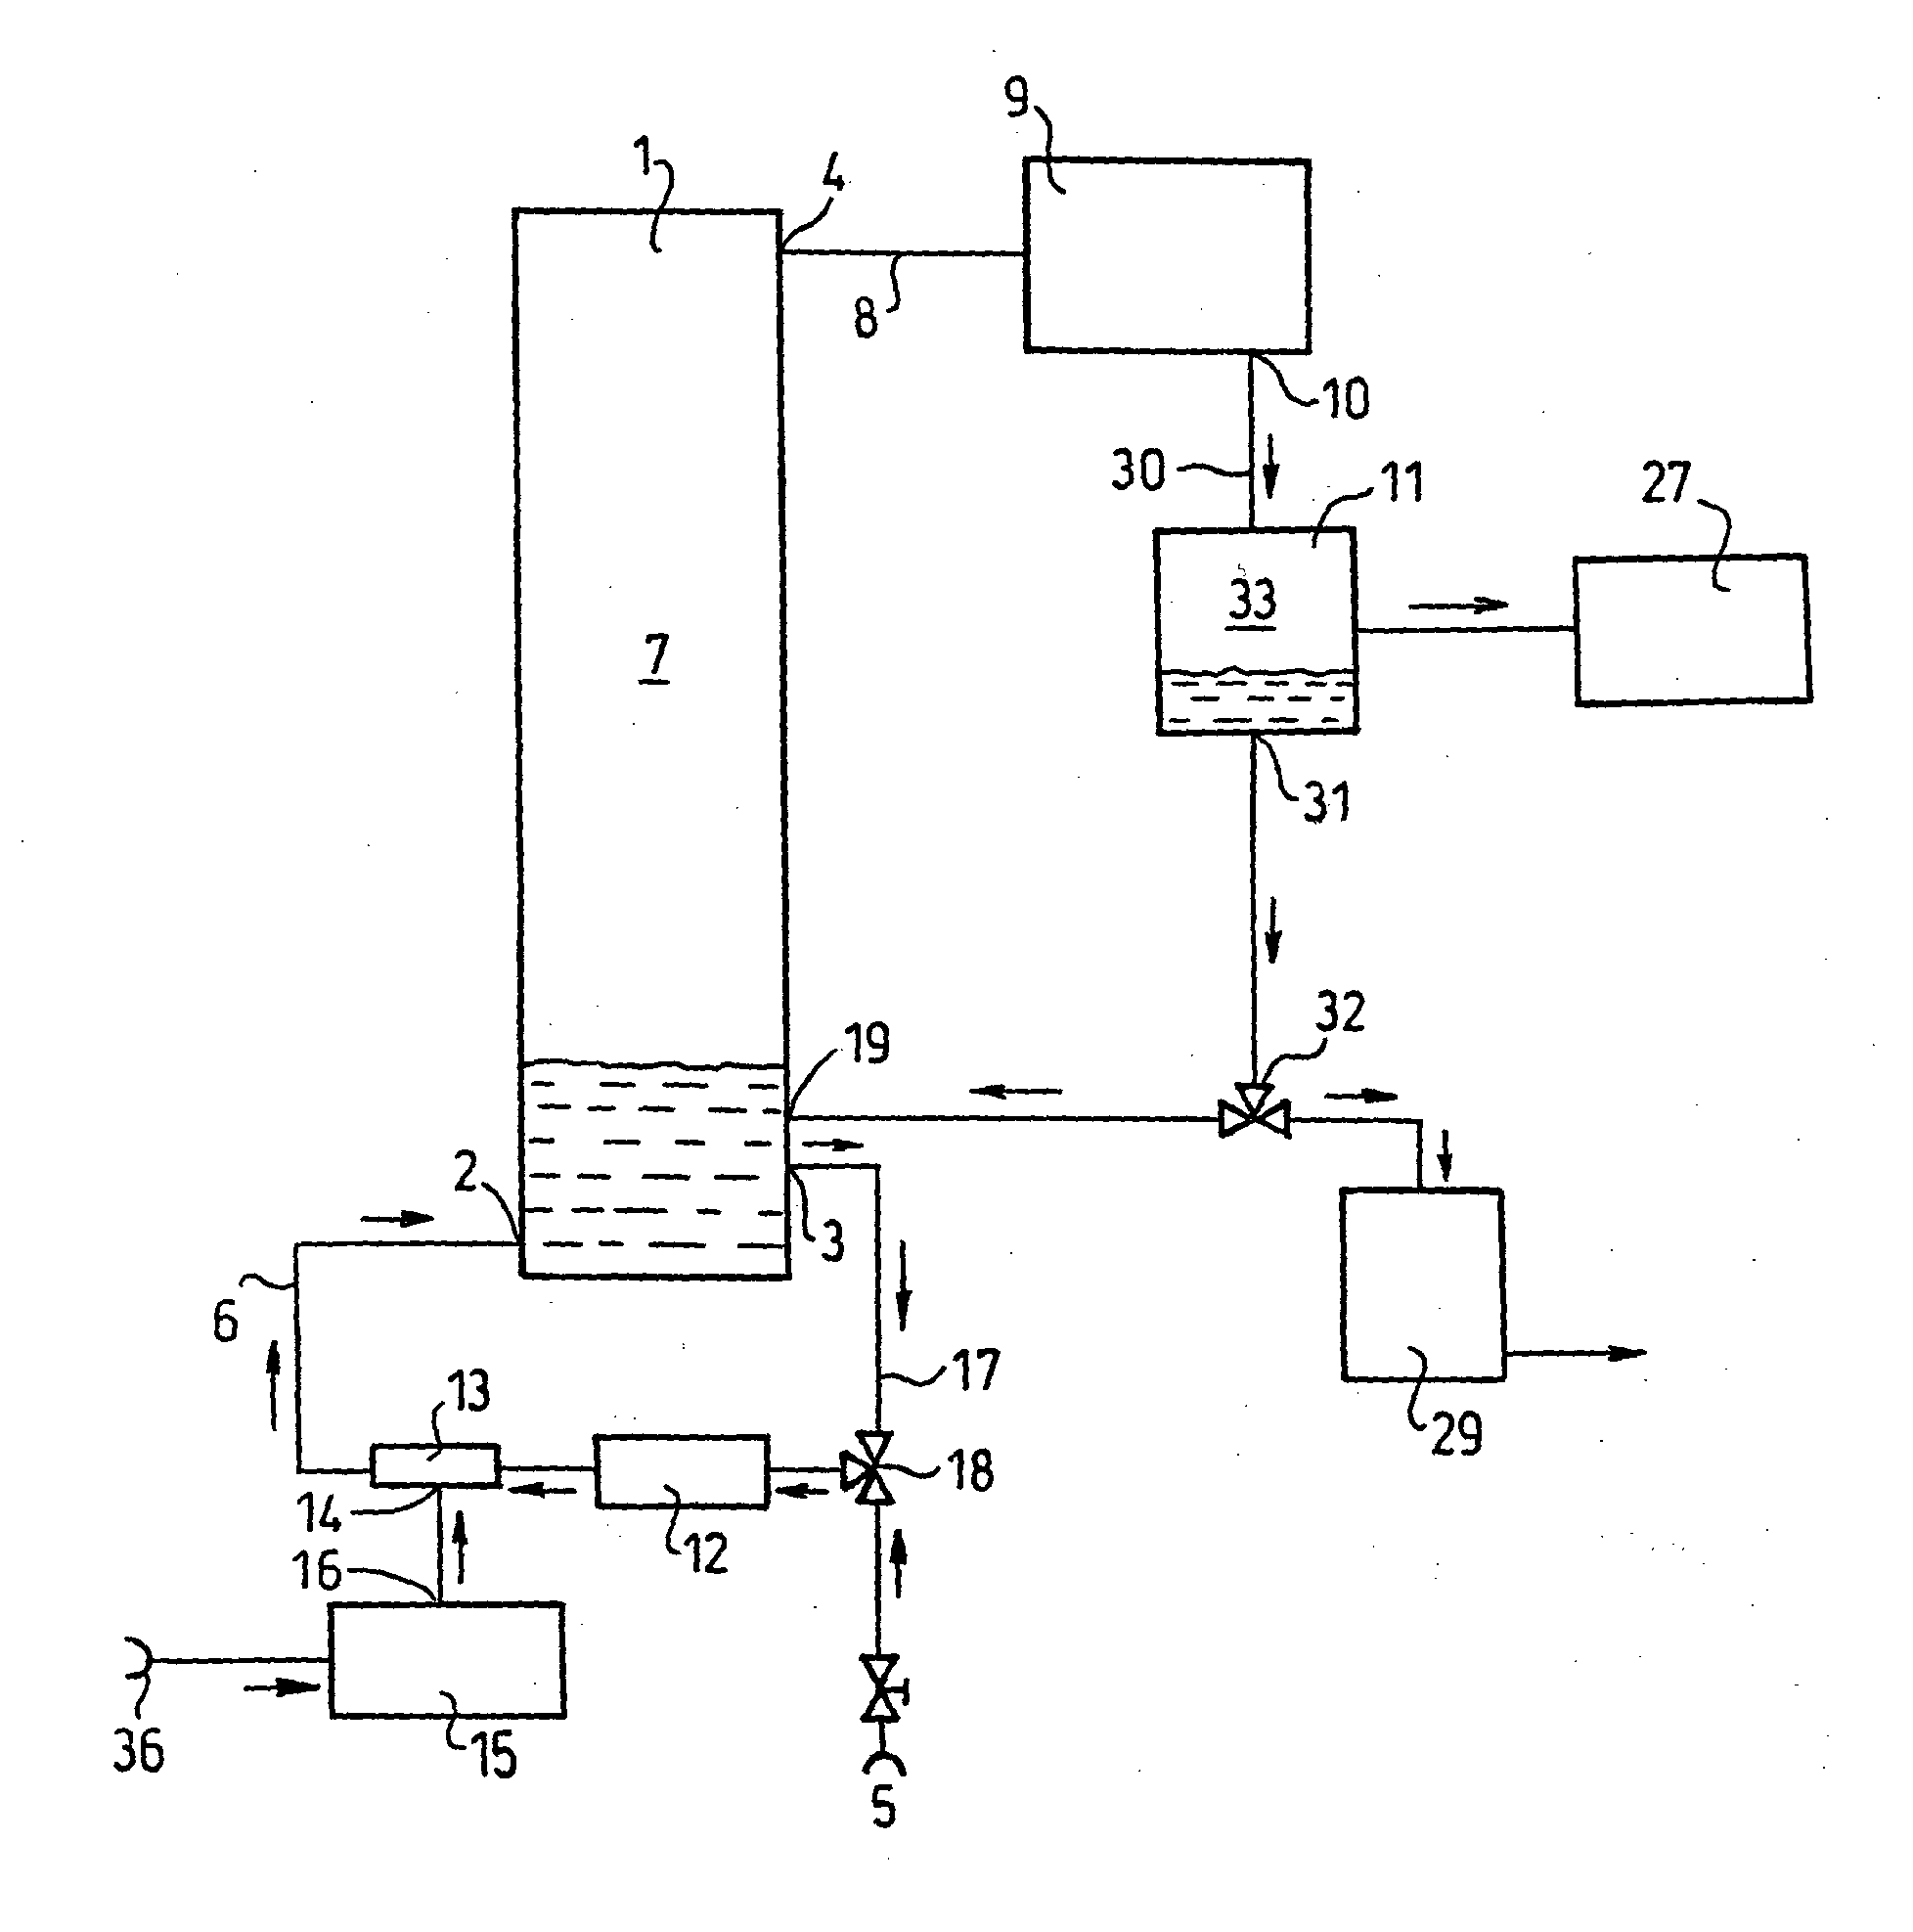 Process and apparatus for the separation of the components of a liquid mixture